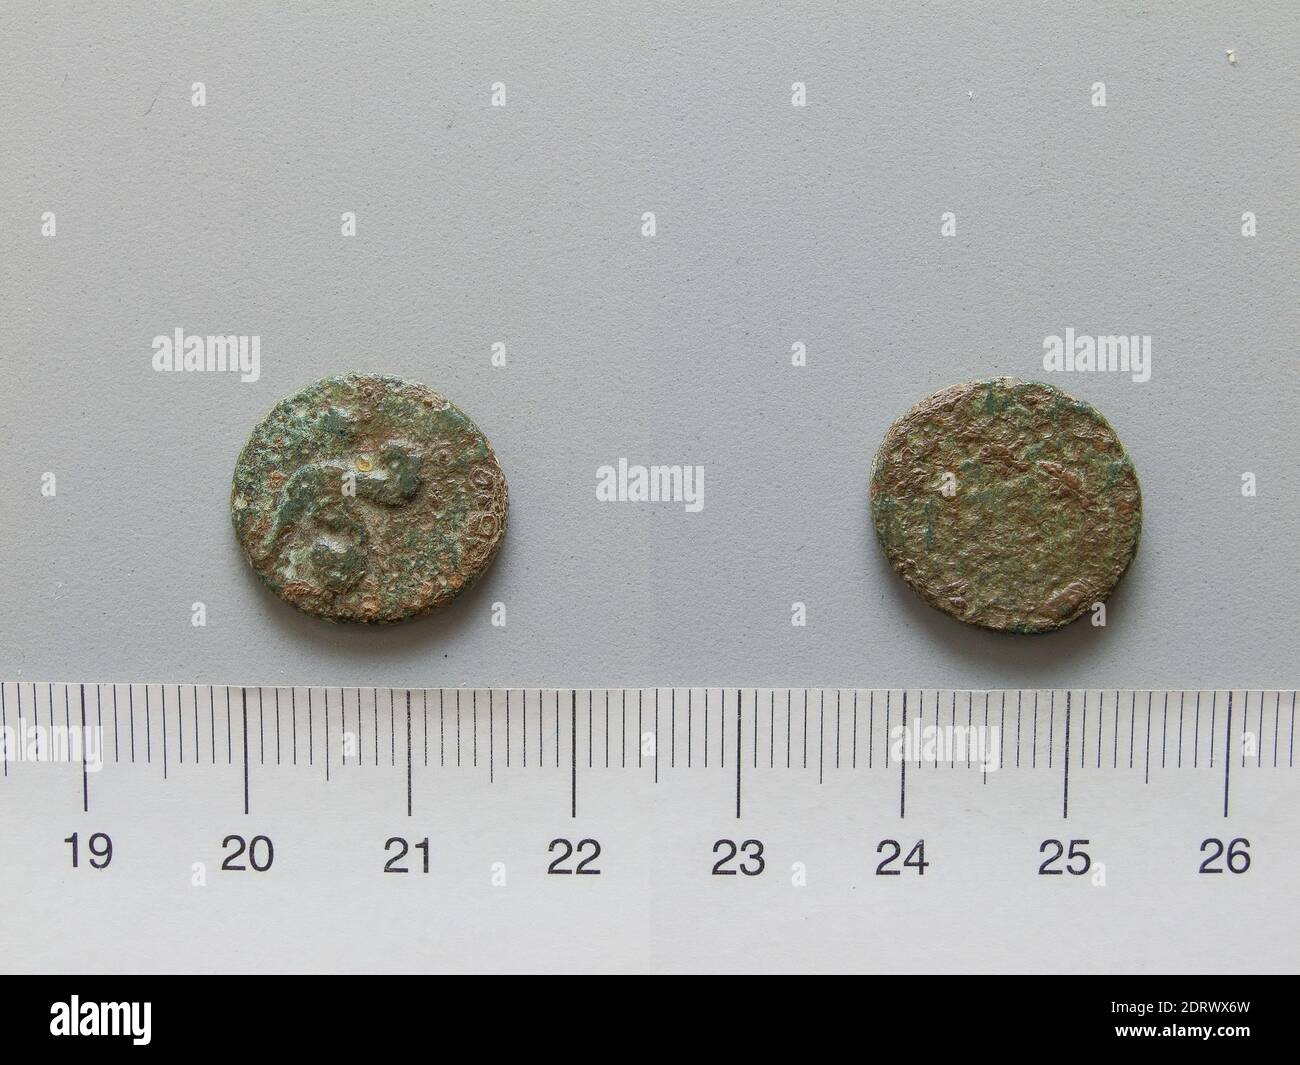 Mint: Chios, Coin from Chios, 199–1 B.C., Copper, 3.2 g, 16.8 mm, Made in Chios, Ionia, Greek, 2nd–1st century B.C., Numismatics Stock Photo